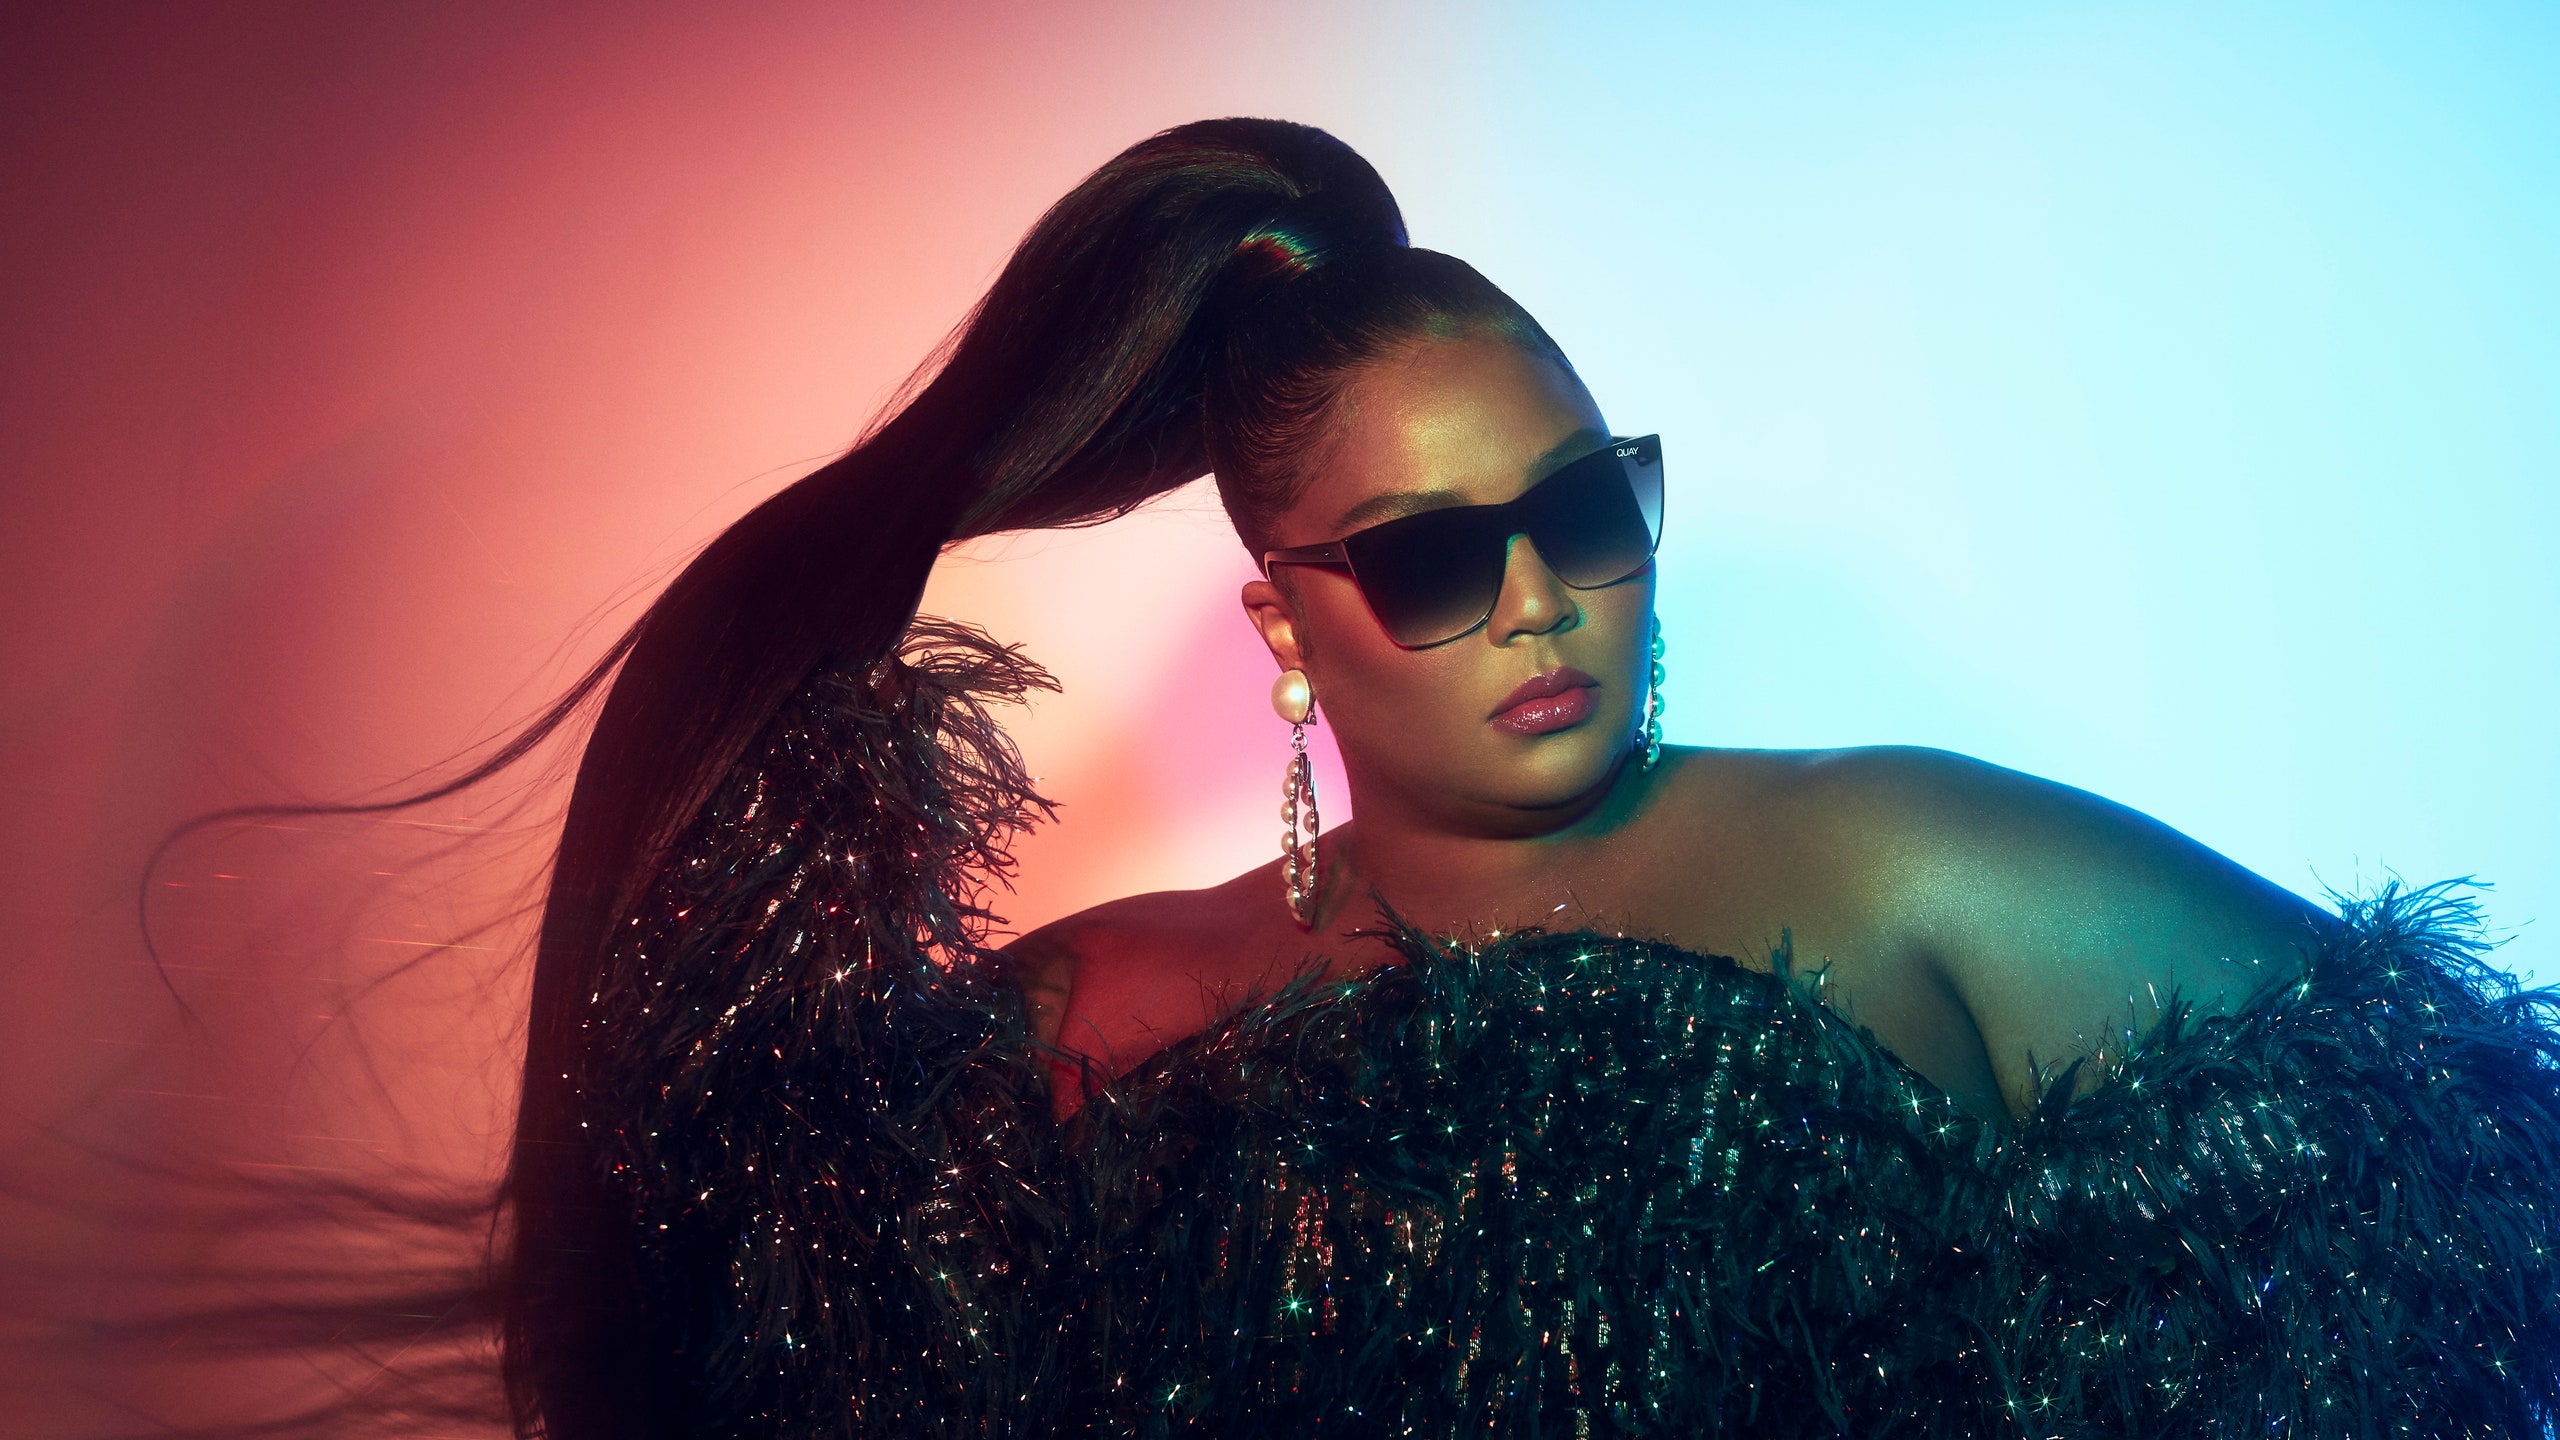 Lizzo X Quay Release Sunglasses Collection Celebrating the launch by Donate 1 Million meals to Feeding America